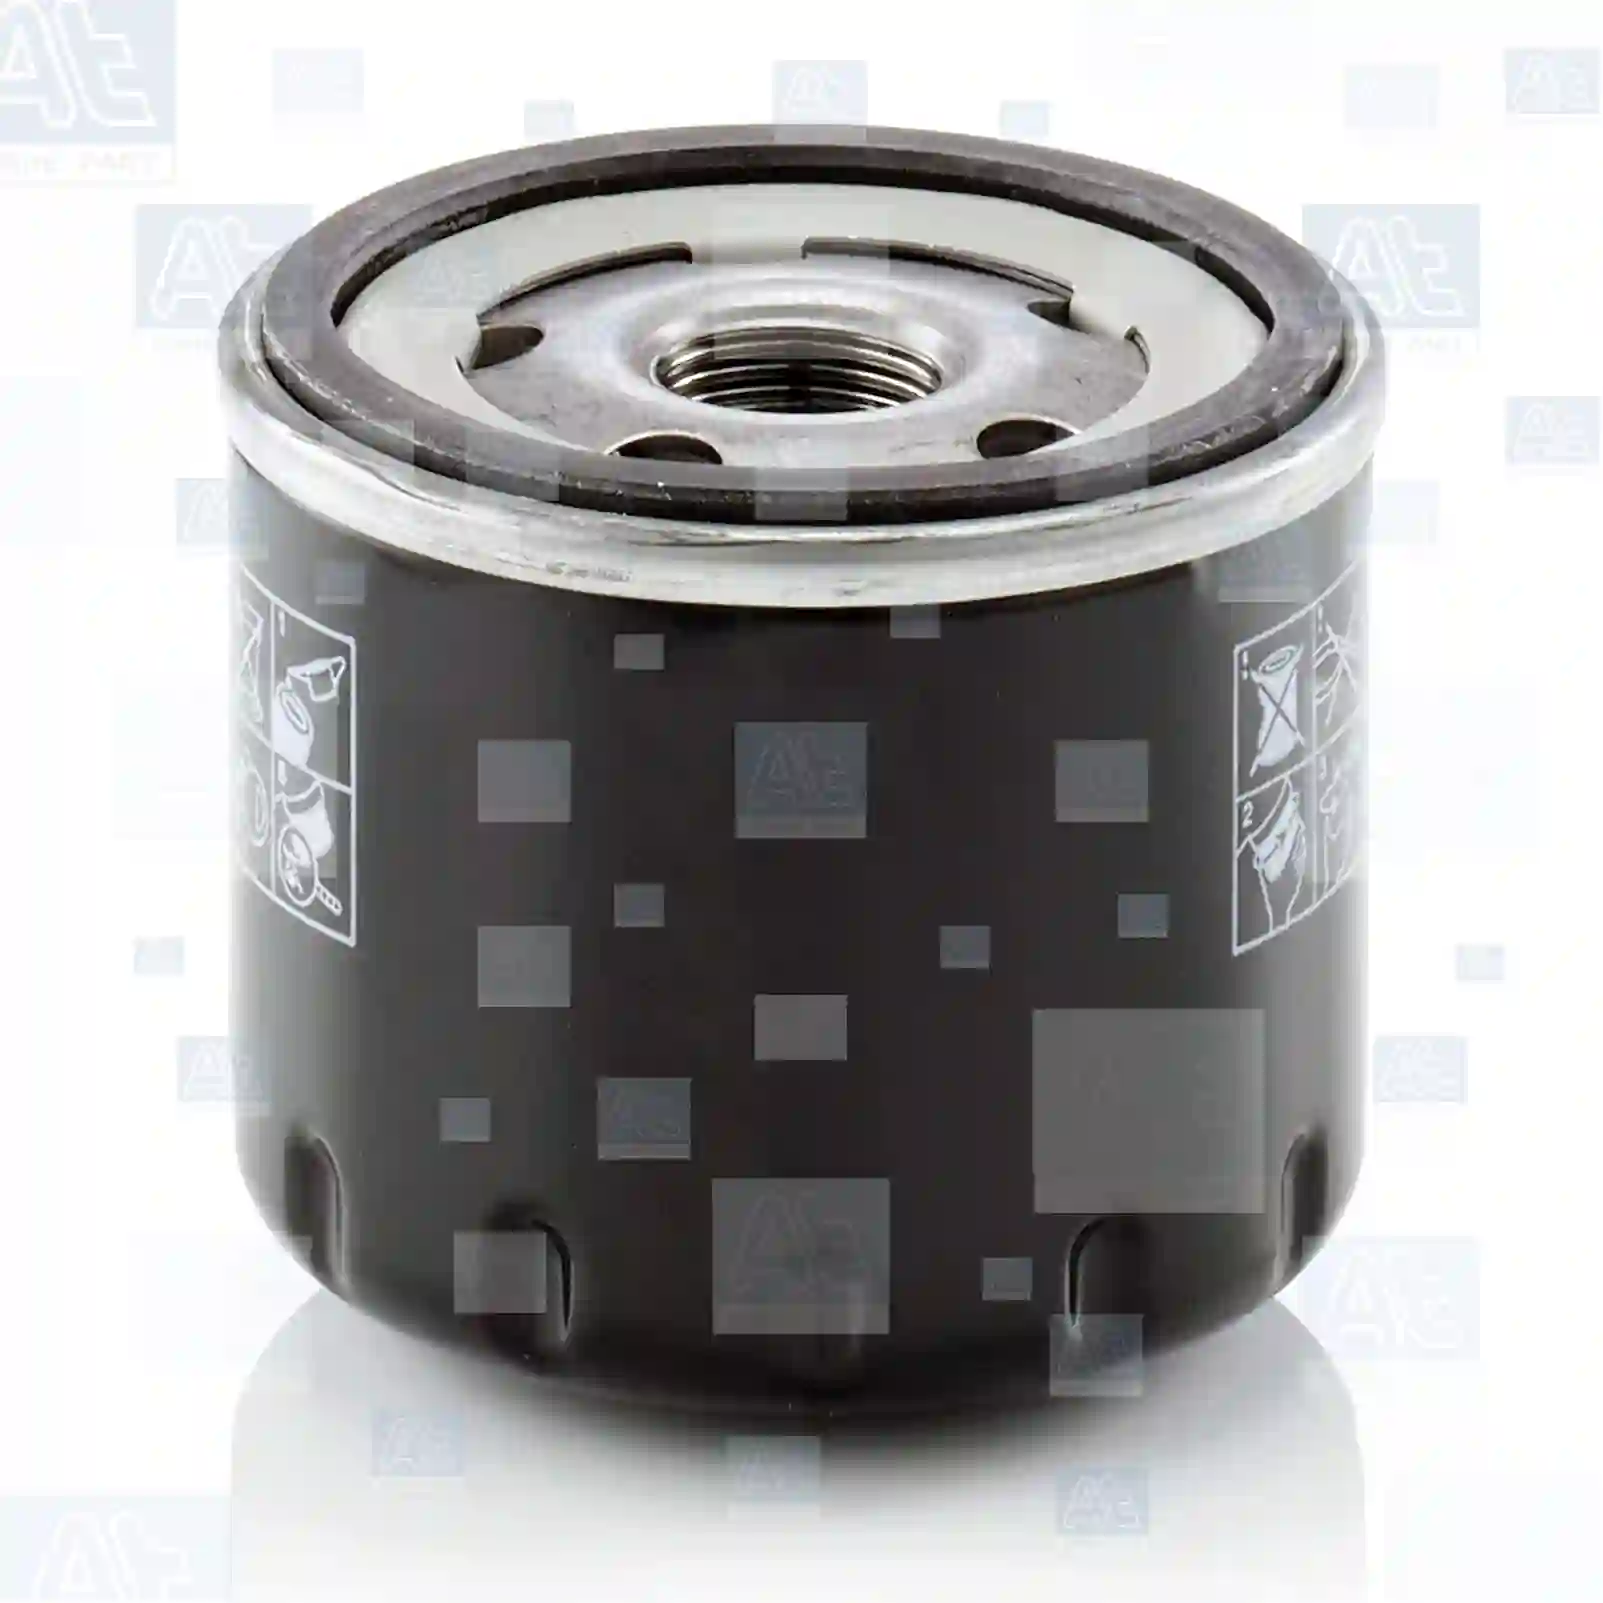 Oil filter, at no 77701682, oem no: 8200768927, 8200867980, 8671017369, 93181255, 93198441, 93181255, 2811800310, 15208-00Q0D, 15208-00Q0G, 15208-00QAF, 15208-AW300, 82007-68927, 4415442, 4434962, 8200768927, 8200867980, 8671017369, 2811800310, 16510-67JG0, 16510-67JG0-000, 16510-84A10, 16510-84A10-000, 16510-84A11, 16510-84A11-000, 16510-84A12, 16510-84A12-000 At Spare Part | Engine, Accelerator Pedal, Camshaft, Connecting Rod, Crankcase, Crankshaft, Cylinder Head, Engine Suspension Mountings, Exhaust Manifold, Exhaust Gas Recirculation, Filter Kits, Flywheel Housing, General Overhaul Kits, Engine, Intake Manifold, Oil Cleaner, Oil Cooler, Oil Filter, Oil Pump, Oil Sump, Piston & Liner, Sensor & Switch, Timing Case, Turbocharger, Cooling System, Belt Tensioner, Coolant Filter, Coolant Pipe, Corrosion Prevention Agent, Drive, Expansion Tank, Fan, Intercooler, Monitors & Gauges, Radiator, Thermostat, V-Belt / Timing belt, Water Pump, Fuel System, Electronical Injector Unit, Feed Pump, Fuel Filter, cpl., Fuel Gauge Sender,  Fuel Line, Fuel Pump, Fuel Tank, Injection Line Kit, Injection Pump, Exhaust System, Clutch & Pedal, Gearbox, Propeller Shaft, Axles, Brake System, Hubs & Wheels, Suspension, Leaf Spring, Universal Parts / Accessories, Steering, Electrical System, Cabin Oil filter, at no 77701682, oem no: 8200768927, 8200867980, 8671017369, 93181255, 93198441, 93181255, 2811800310, 15208-00Q0D, 15208-00Q0G, 15208-00QAF, 15208-AW300, 82007-68927, 4415442, 4434962, 8200768927, 8200867980, 8671017369, 2811800310, 16510-67JG0, 16510-67JG0-000, 16510-84A10, 16510-84A10-000, 16510-84A11, 16510-84A11-000, 16510-84A12, 16510-84A12-000 At Spare Part | Engine, Accelerator Pedal, Camshaft, Connecting Rod, Crankcase, Crankshaft, Cylinder Head, Engine Suspension Mountings, Exhaust Manifold, Exhaust Gas Recirculation, Filter Kits, Flywheel Housing, General Overhaul Kits, Engine, Intake Manifold, Oil Cleaner, Oil Cooler, Oil Filter, Oil Pump, Oil Sump, Piston & Liner, Sensor & Switch, Timing Case, Turbocharger, Cooling System, Belt Tensioner, Coolant Filter, Coolant Pipe, Corrosion Prevention Agent, Drive, Expansion Tank, Fan, Intercooler, Monitors & Gauges, Radiator, Thermostat, V-Belt / Timing belt, Water Pump, Fuel System, Electronical Injector Unit, Feed Pump, Fuel Filter, cpl., Fuel Gauge Sender,  Fuel Line, Fuel Pump, Fuel Tank, Injection Line Kit, Injection Pump, Exhaust System, Clutch & Pedal, Gearbox, Propeller Shaft, Axles, Brake System, Hubs & Wheels, Suspension, Leaf Spring, Universal Parts / Accessories, Steering, Electrical System, Cabin